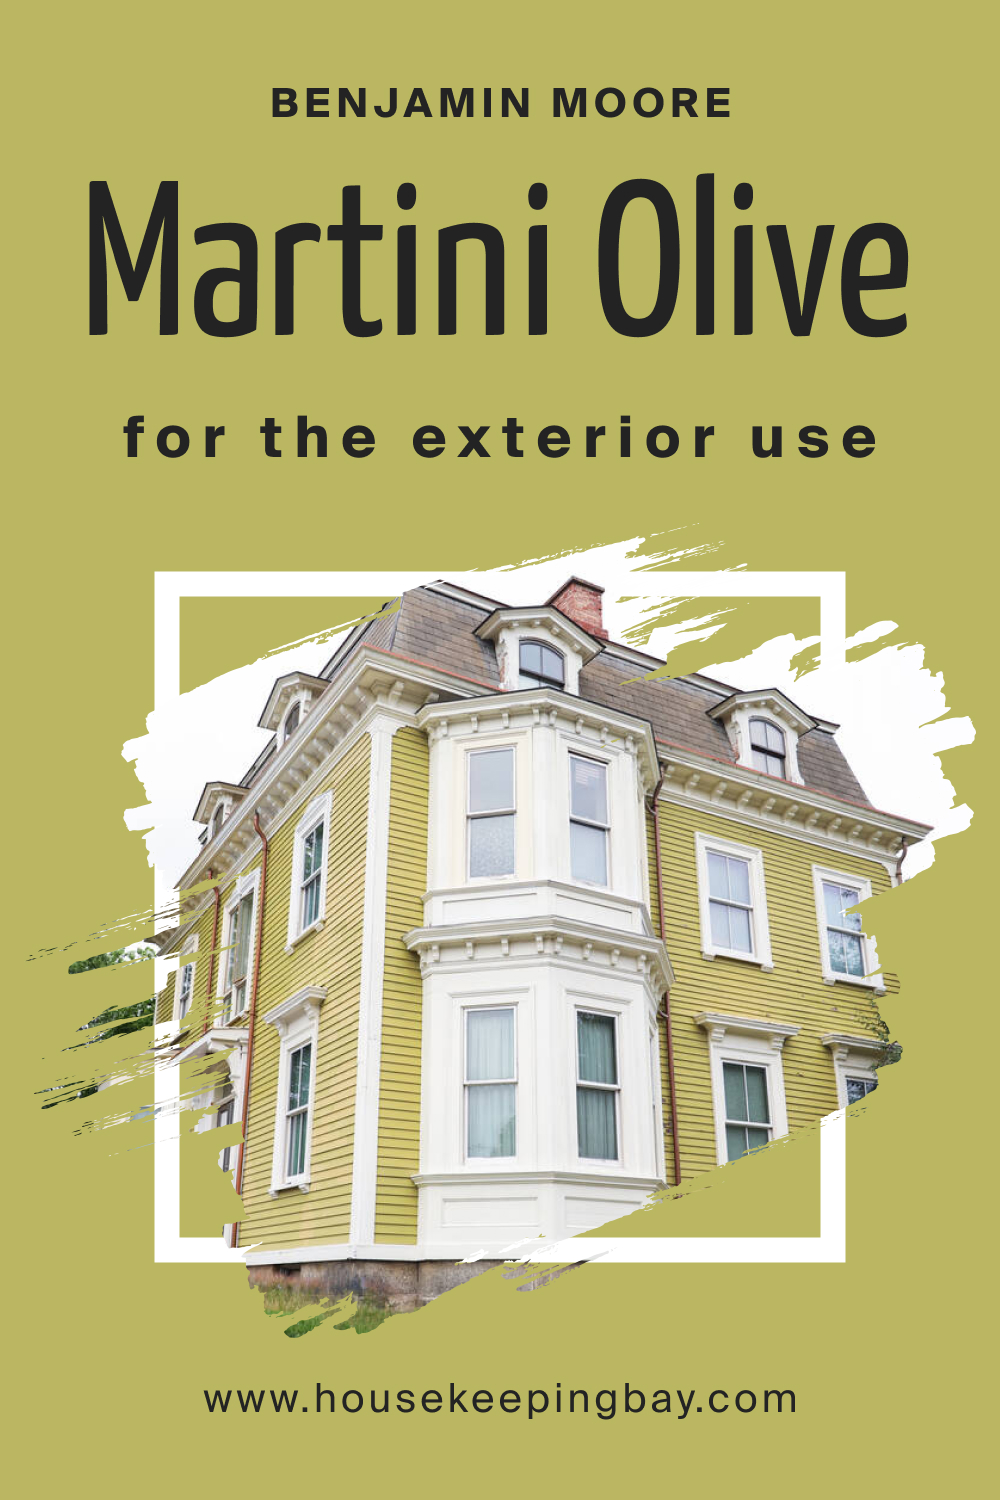 How to Use Martini Olive CSP-890 for an Exterior?